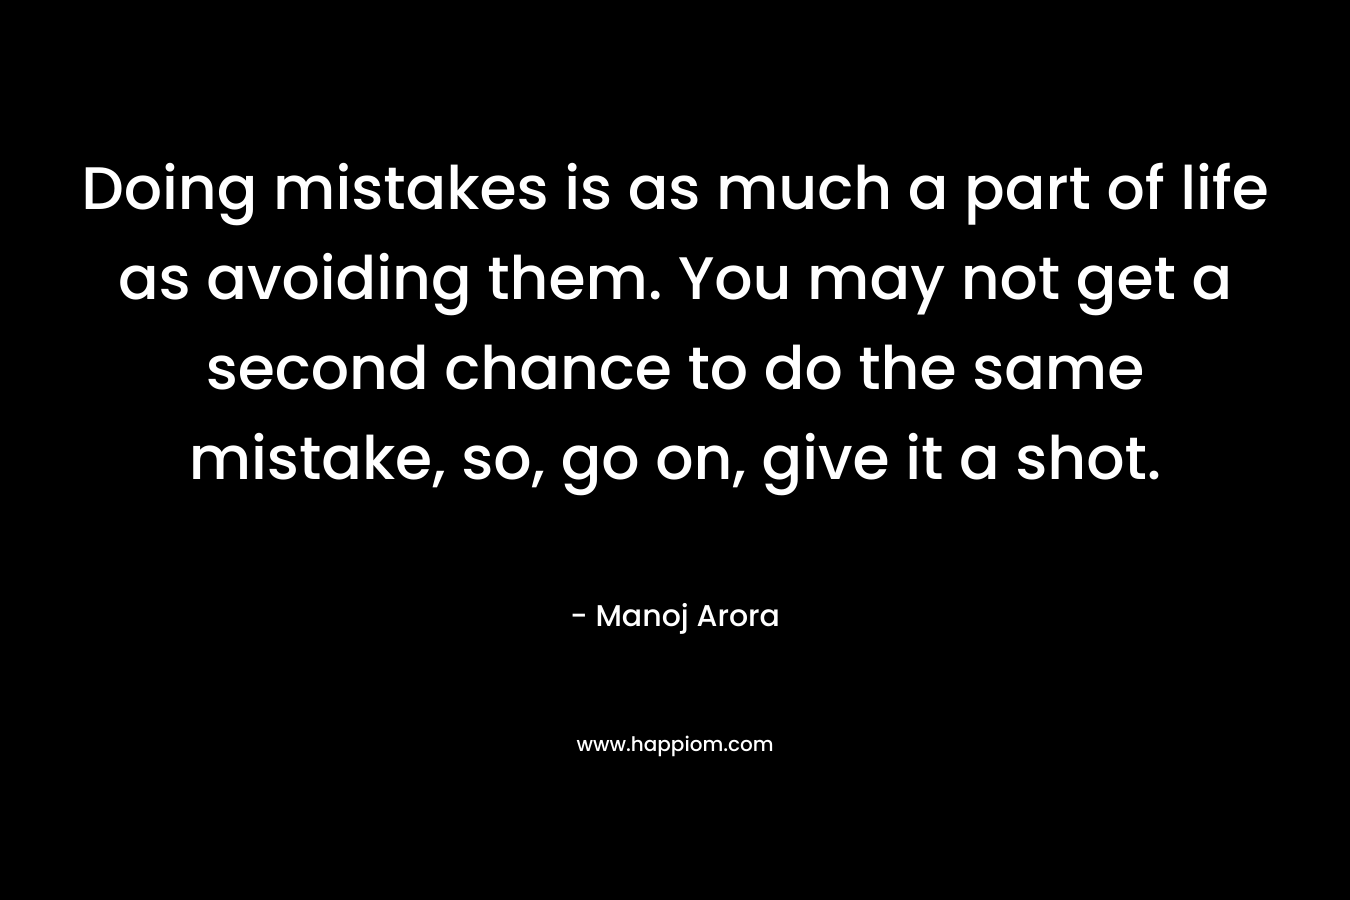 Doing mistakes is as much a part of life as avoiding them. You may not get a second chance to do the same mistake, so, go on, give it a shot. – Manoj Arora